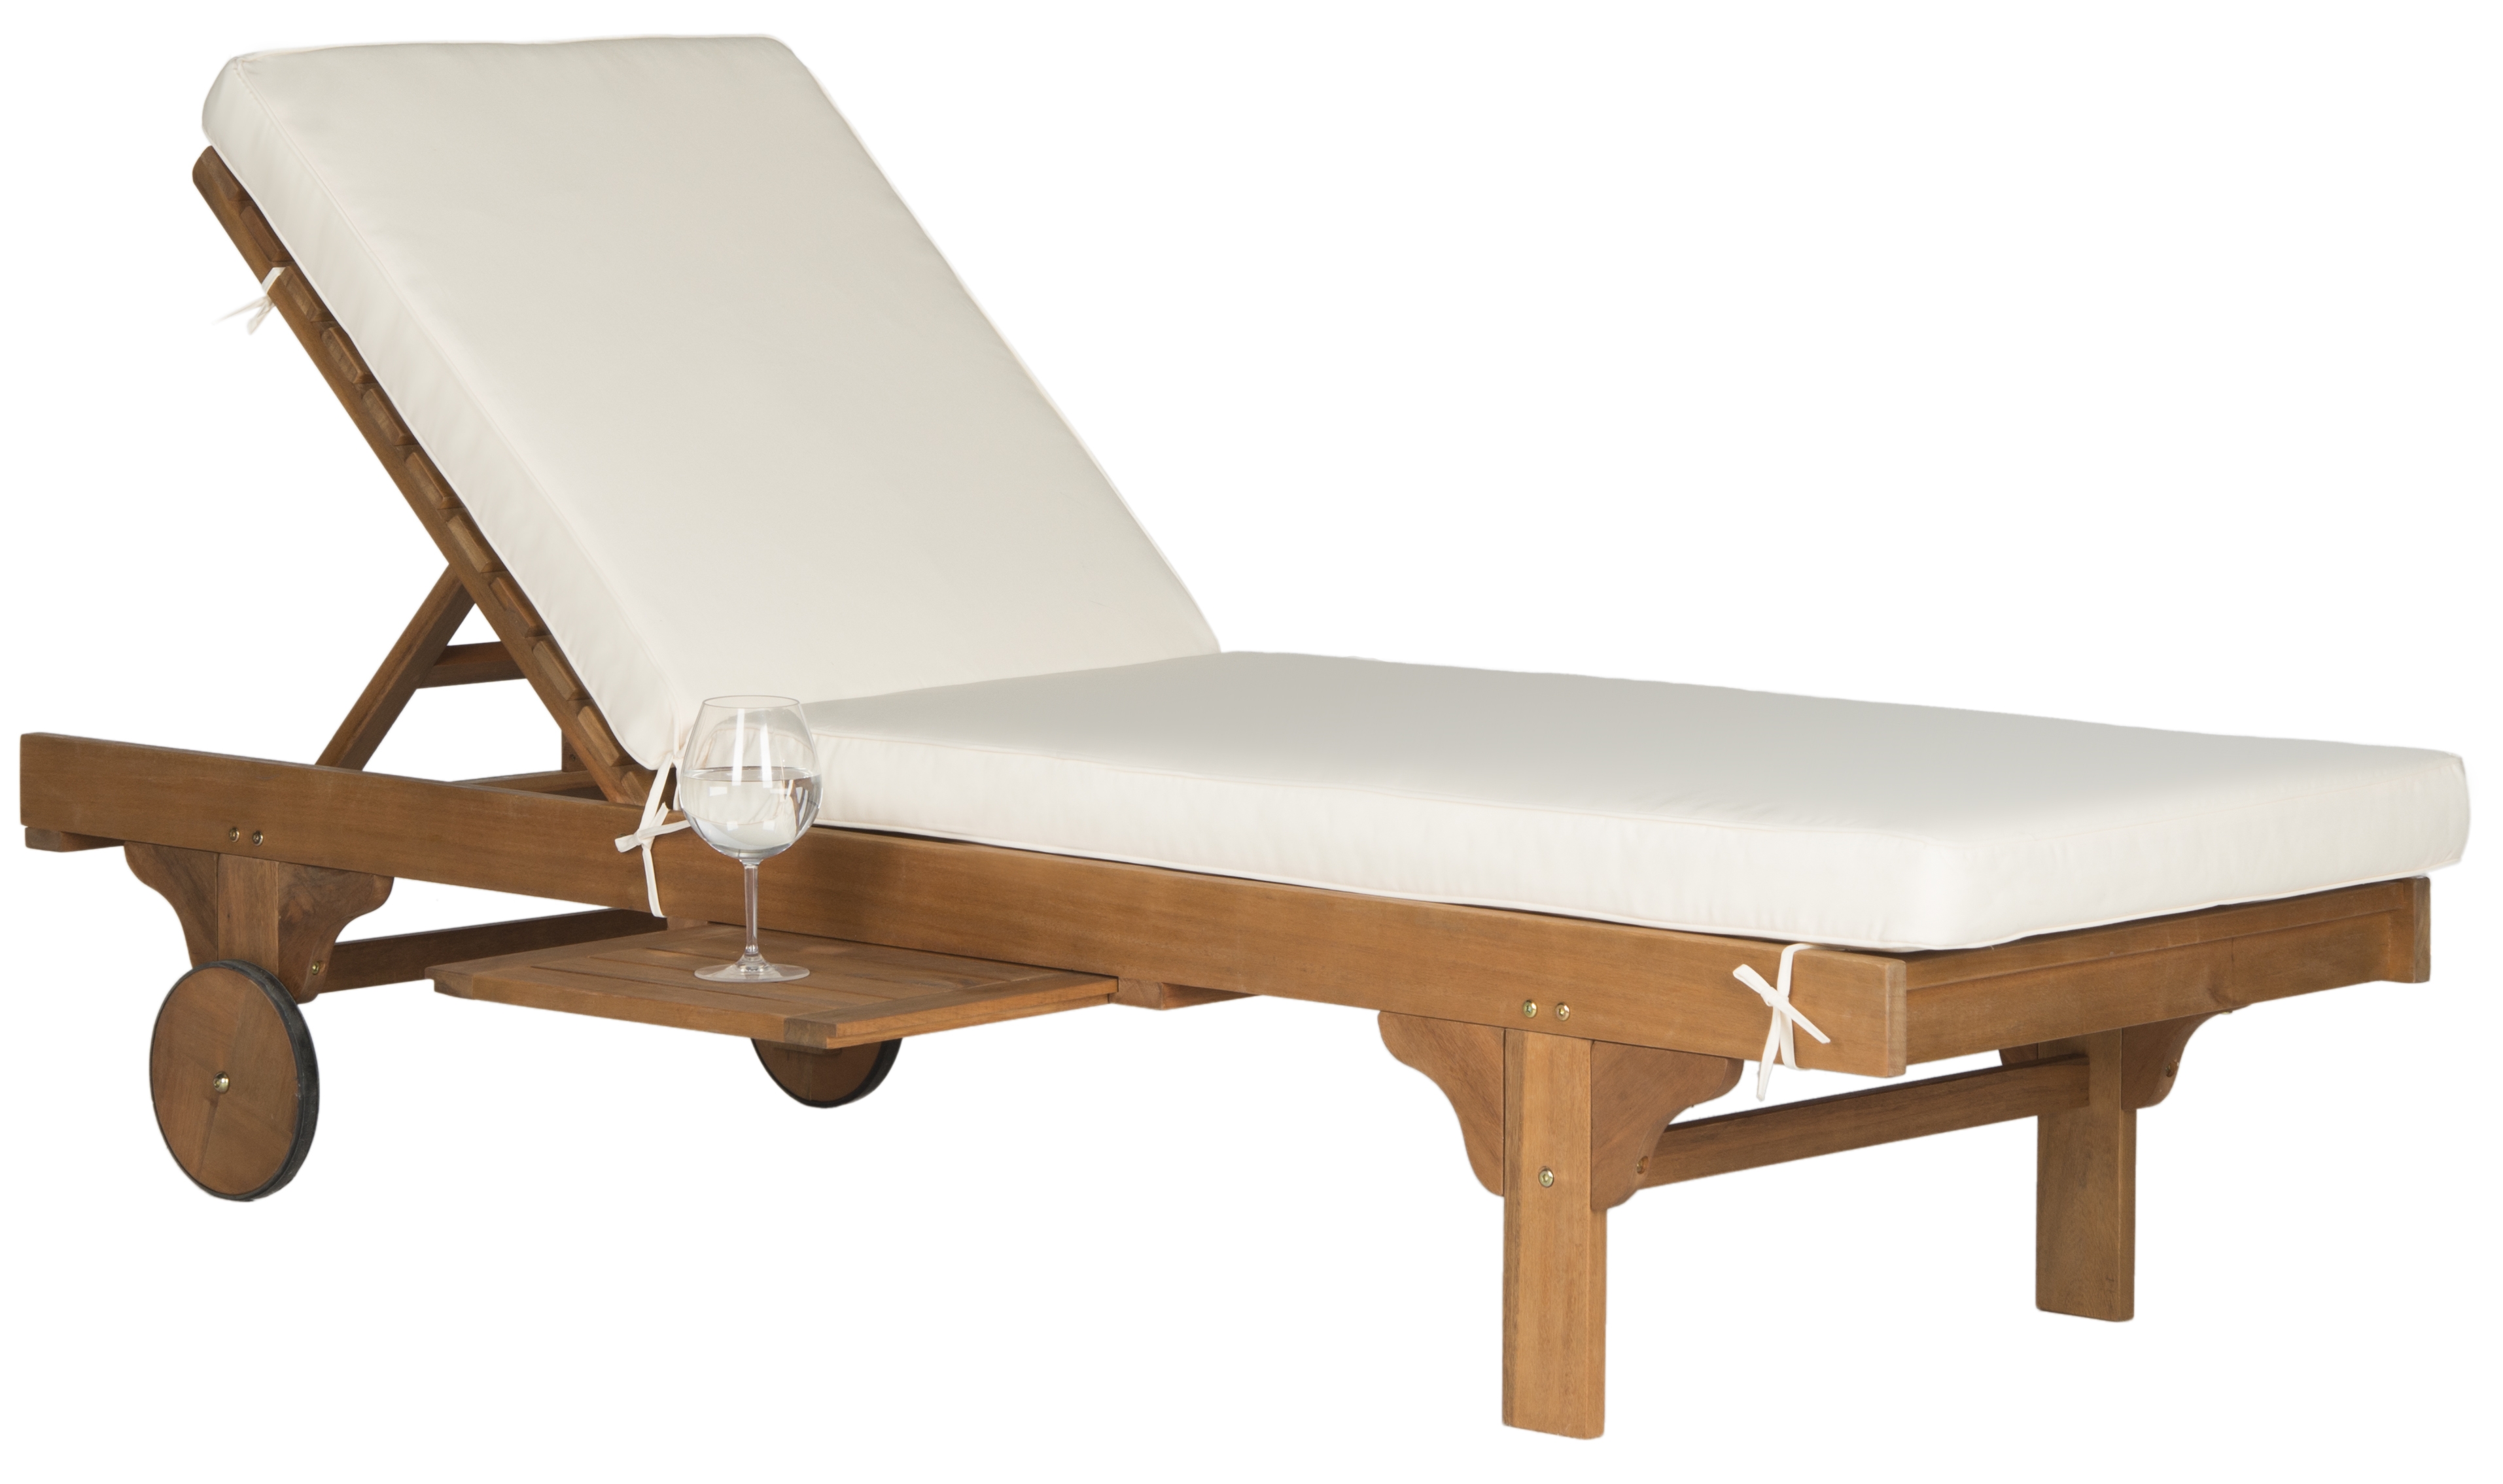 Newport Chaise Lounge Chair With Side Table - Natural/Beige - Arlo Home - Image 0